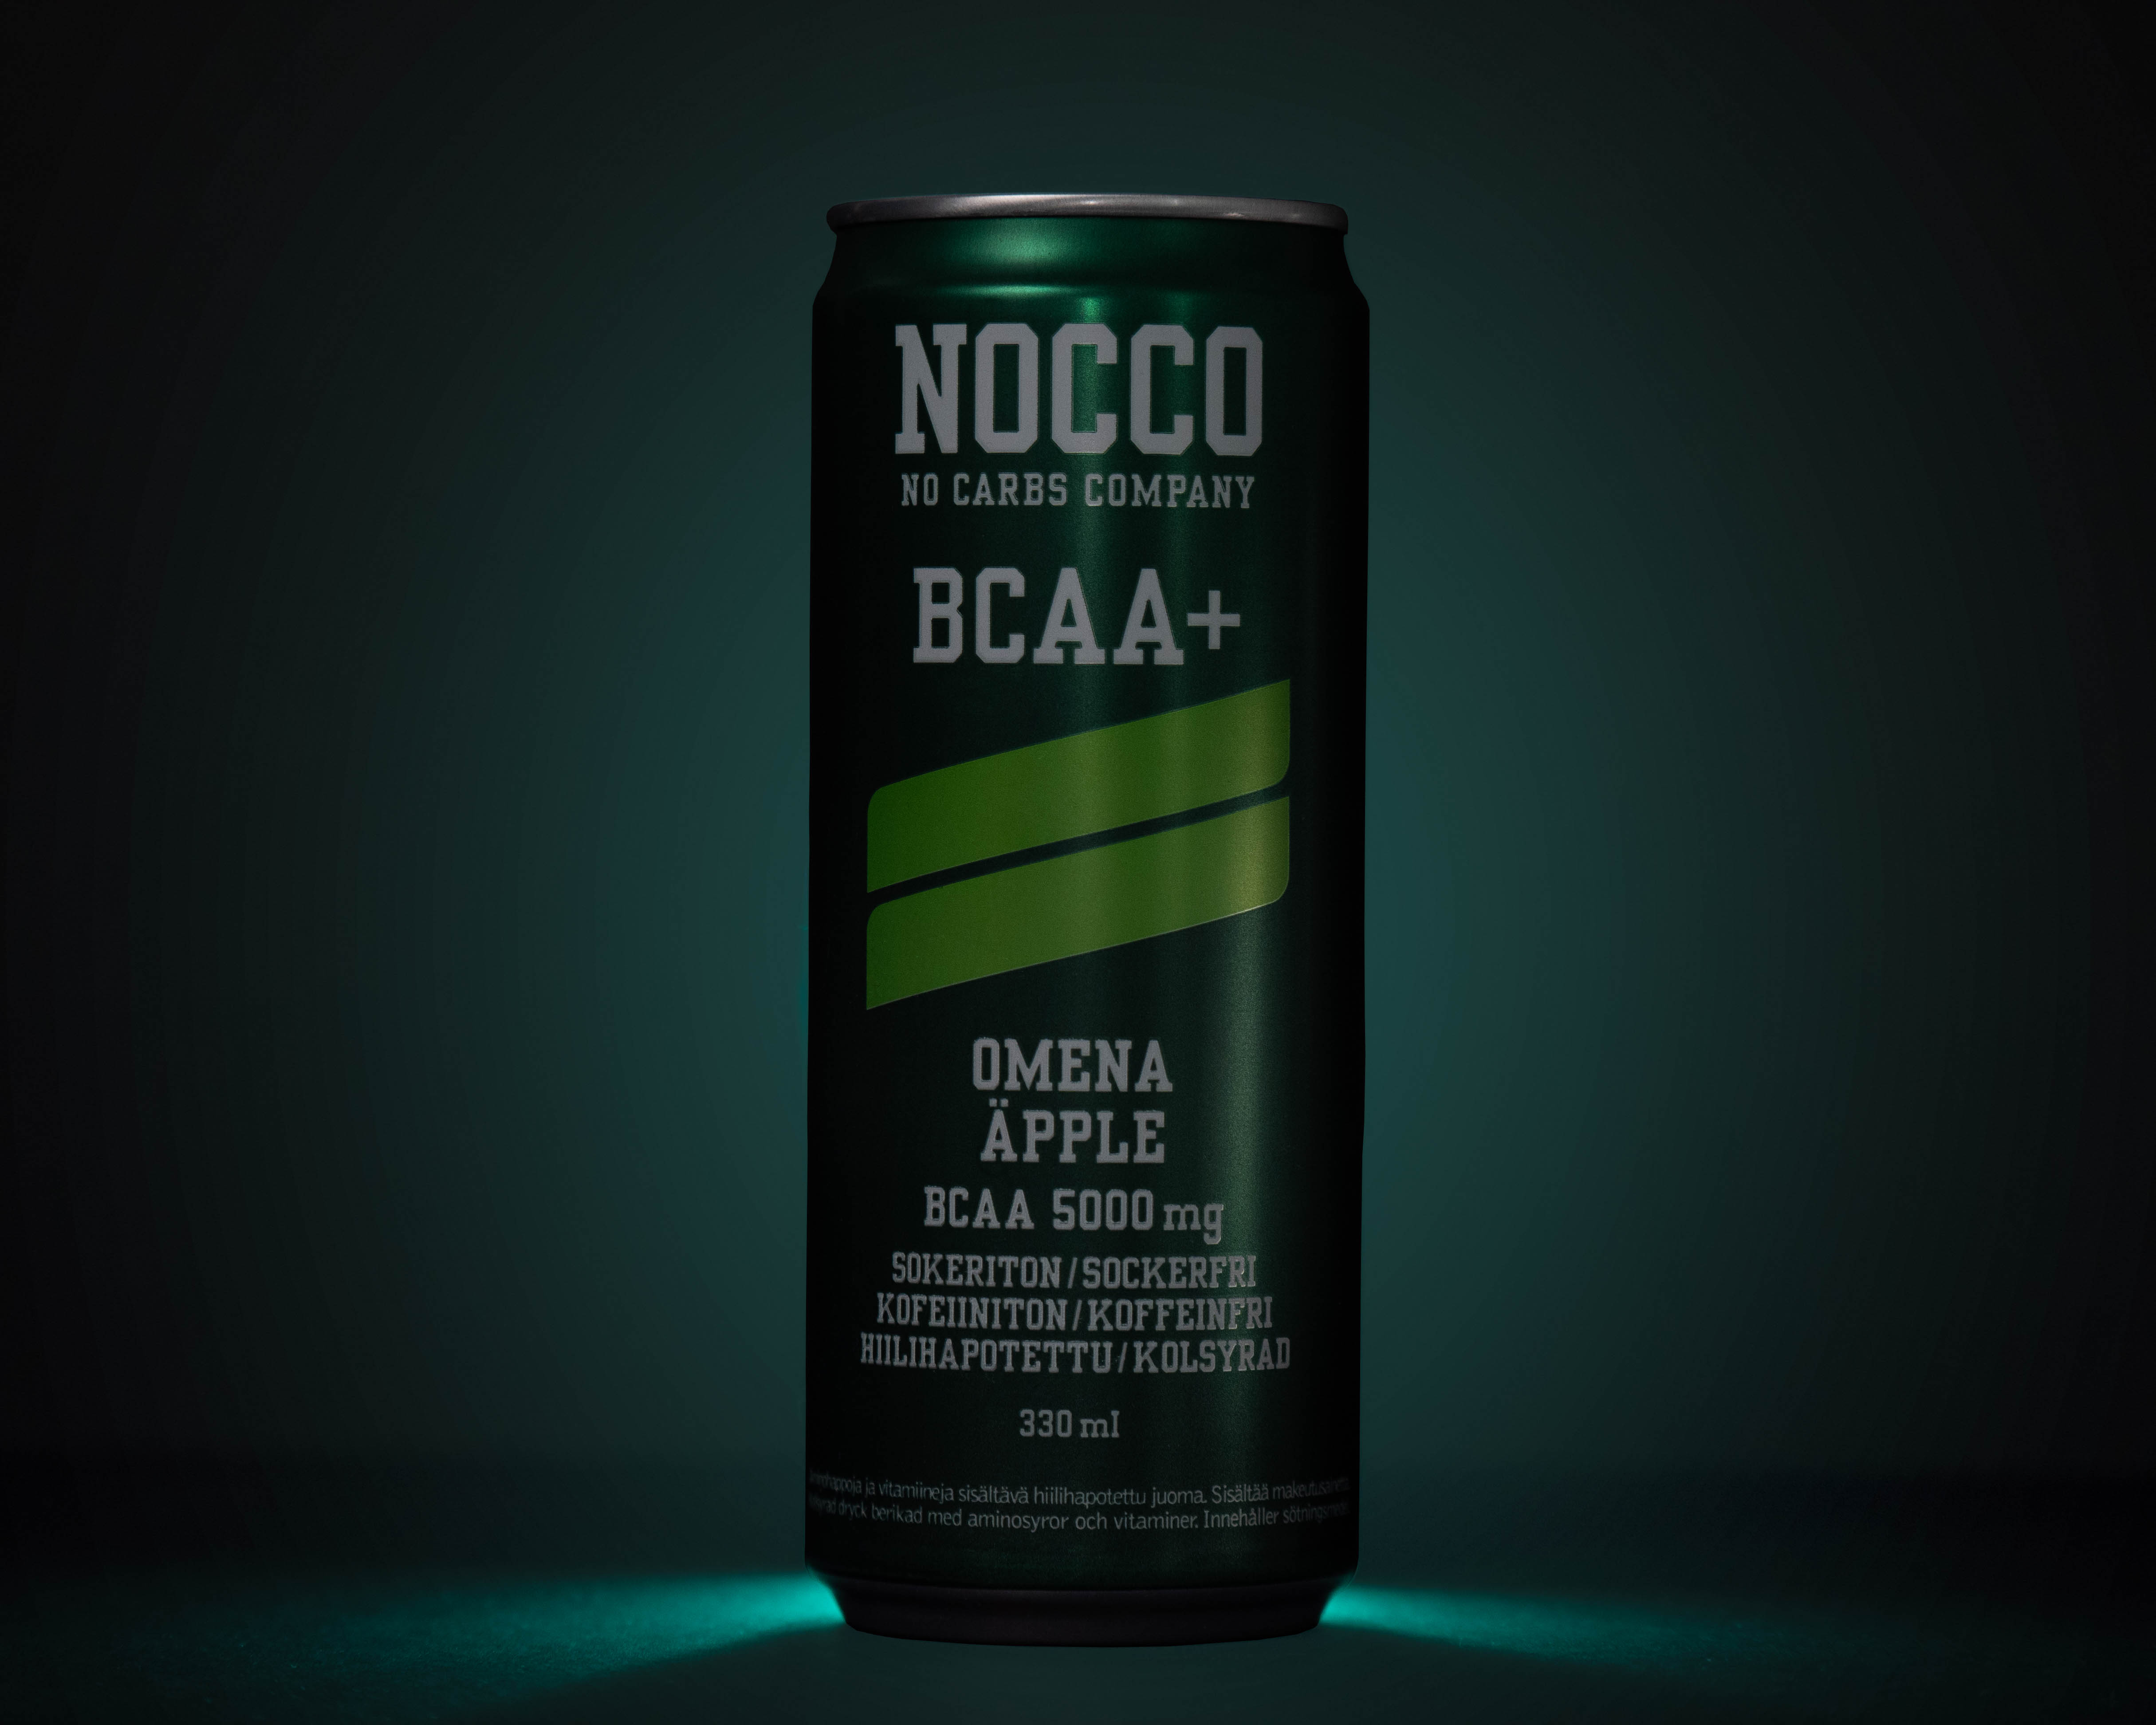 Nocco can Apple BCAA+ green light behind the can